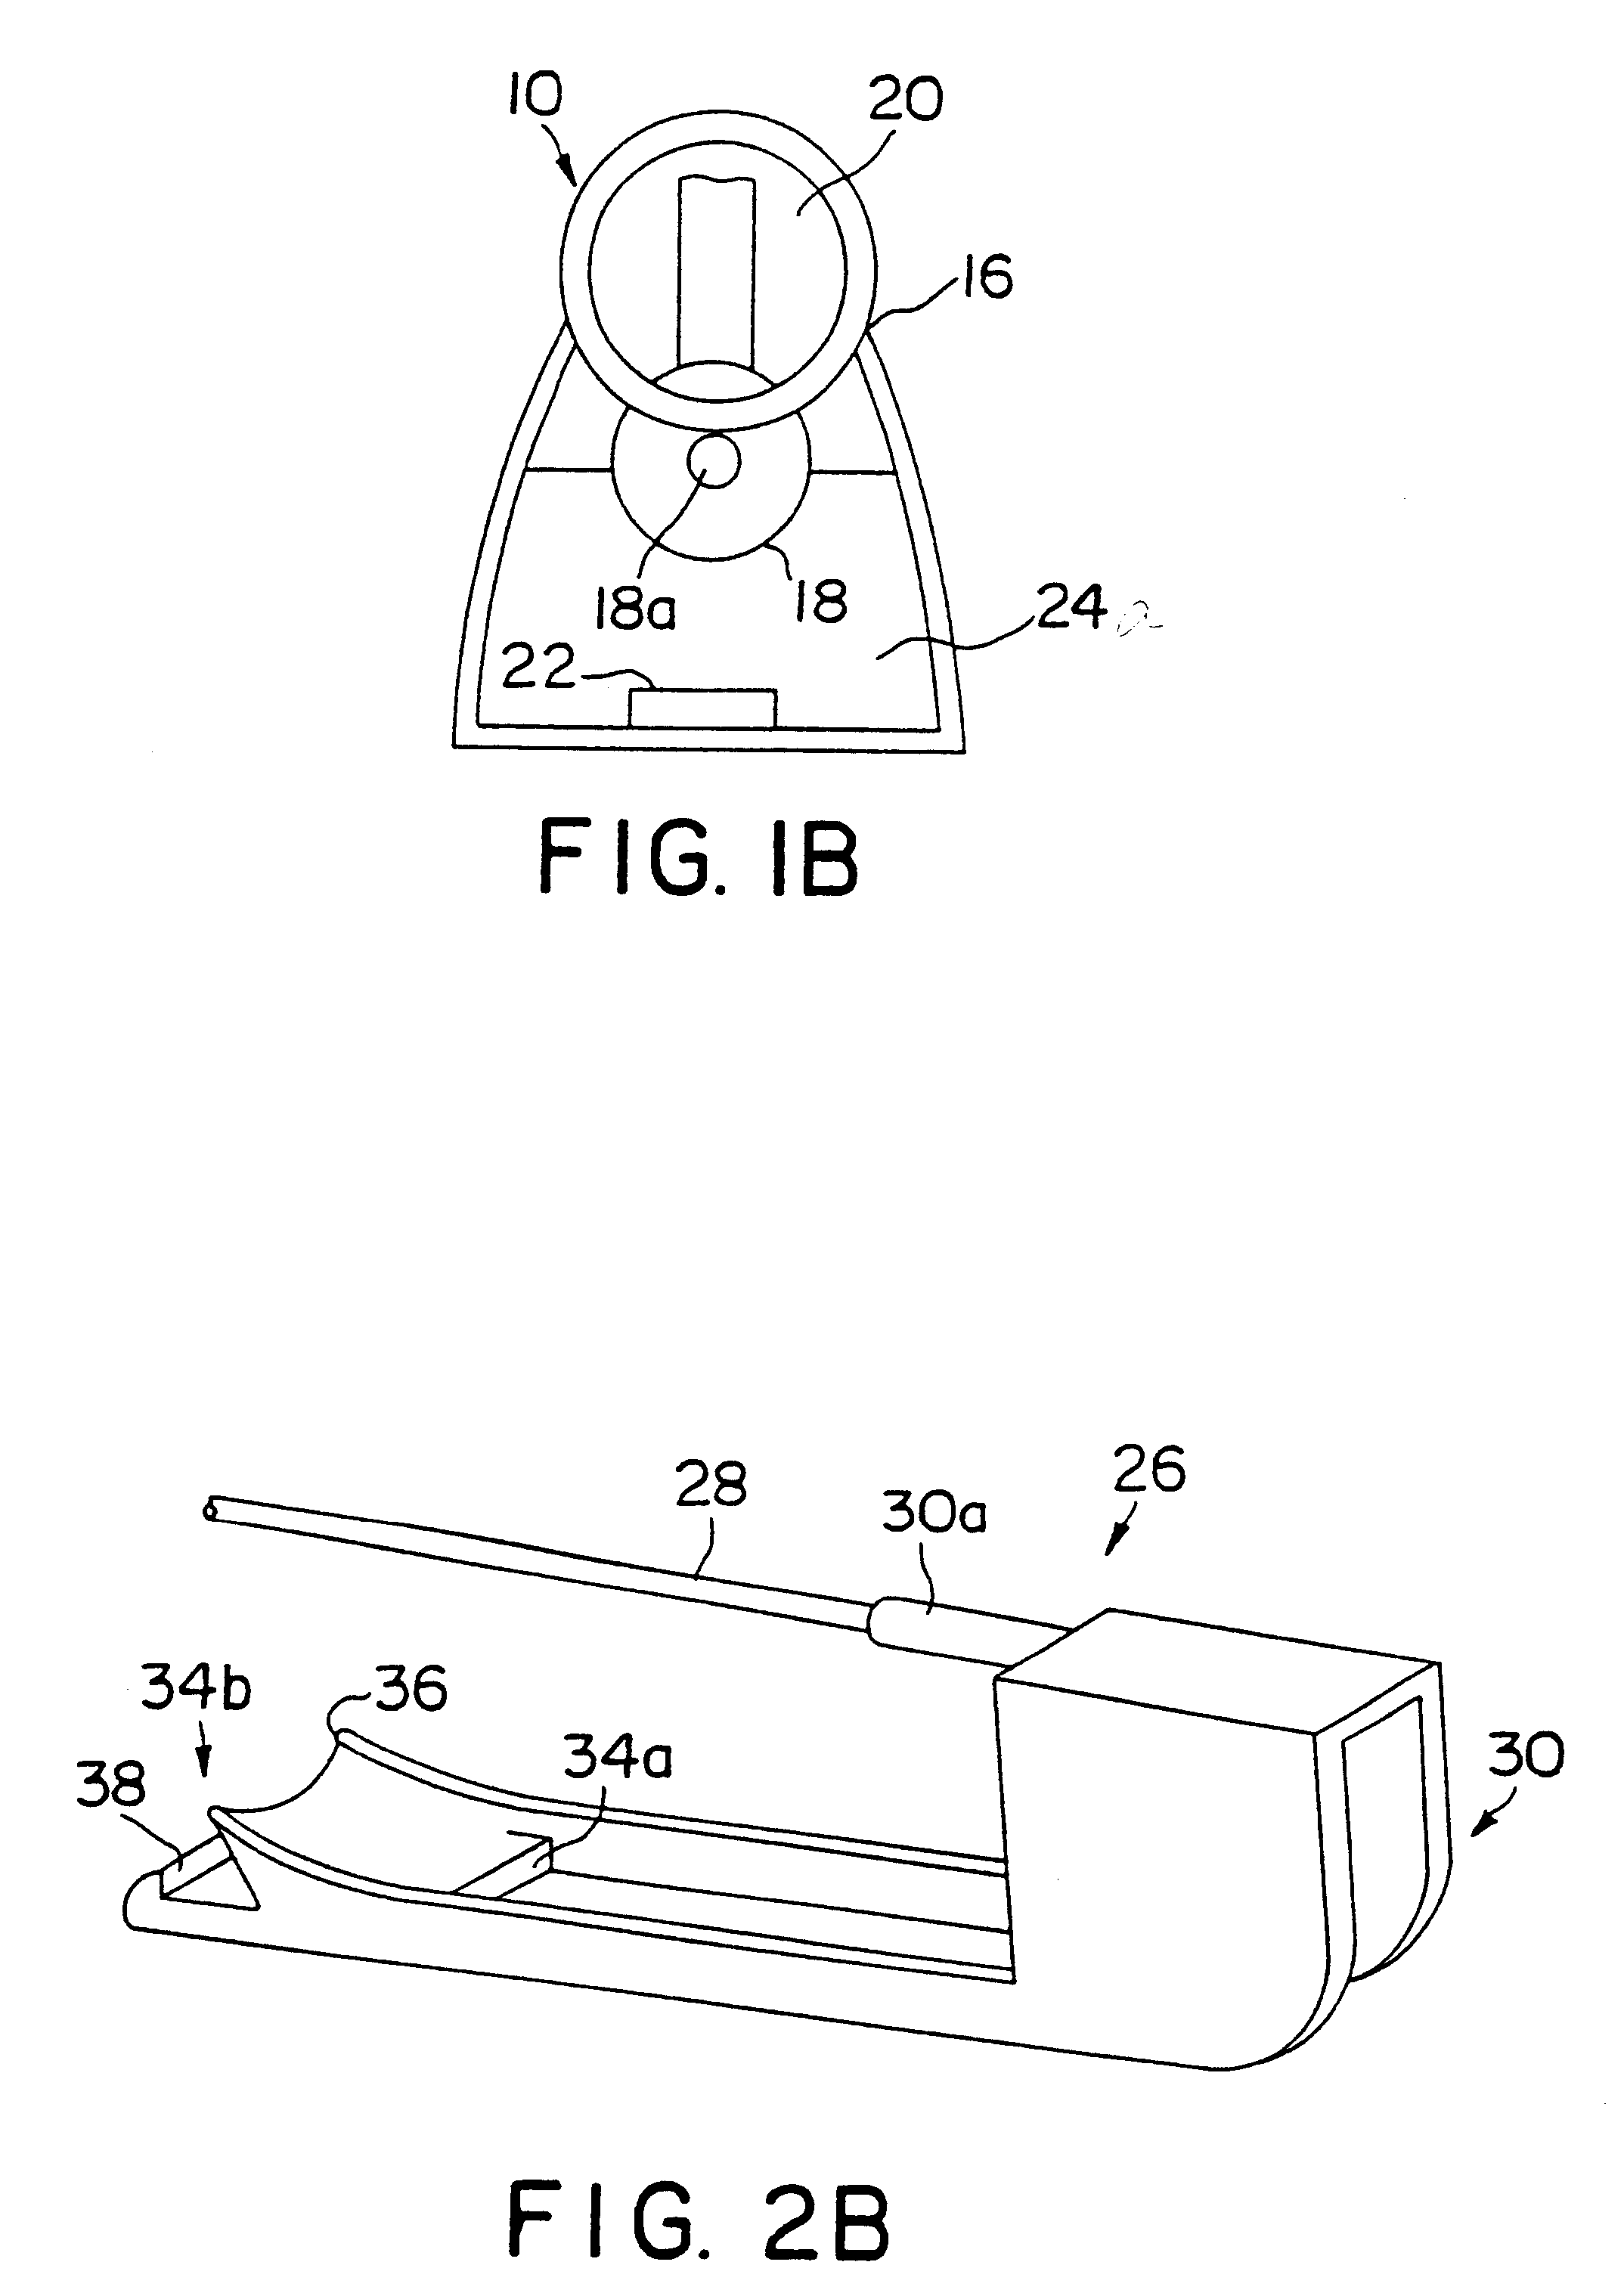 Releasable locking needle assembly with optional release accessory therefor